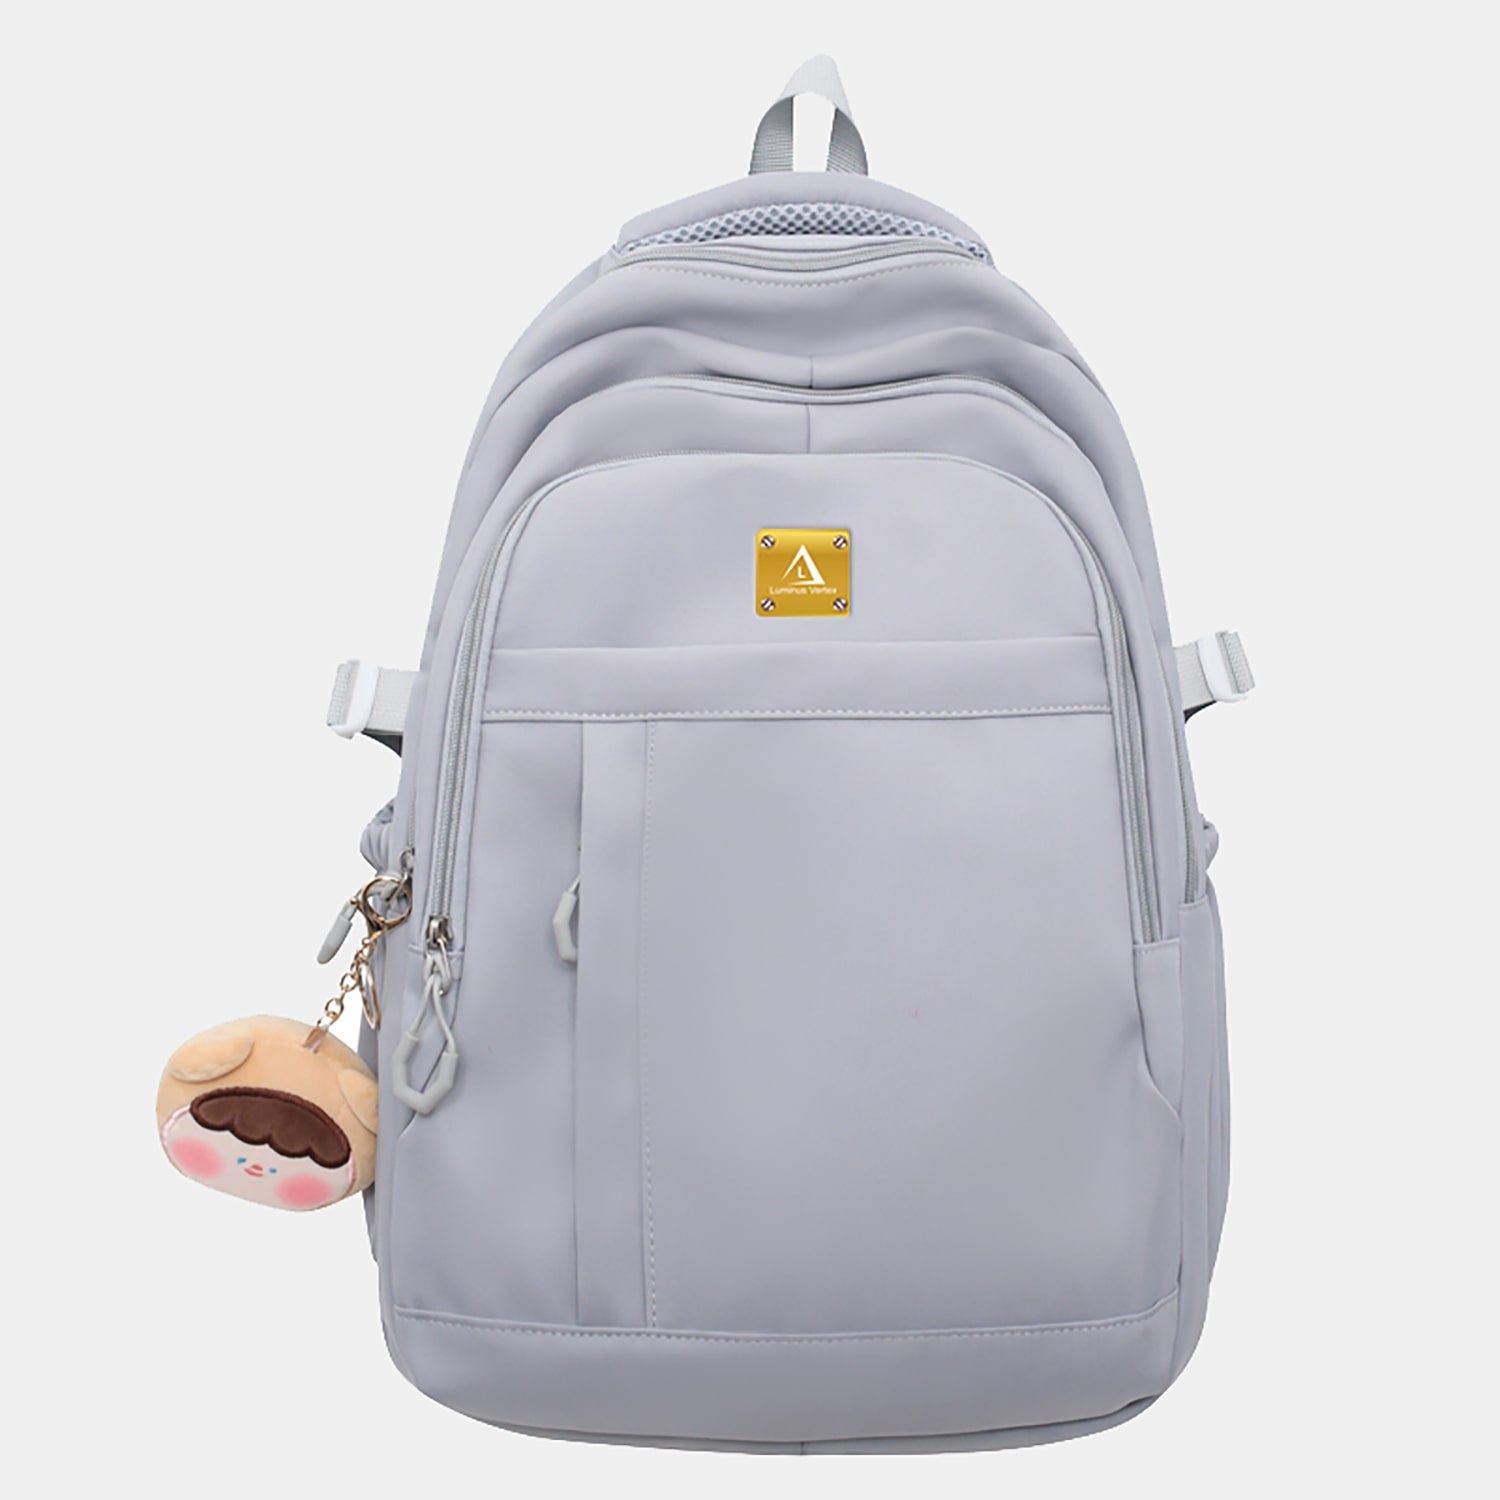 Exquisite Fashion Backpack